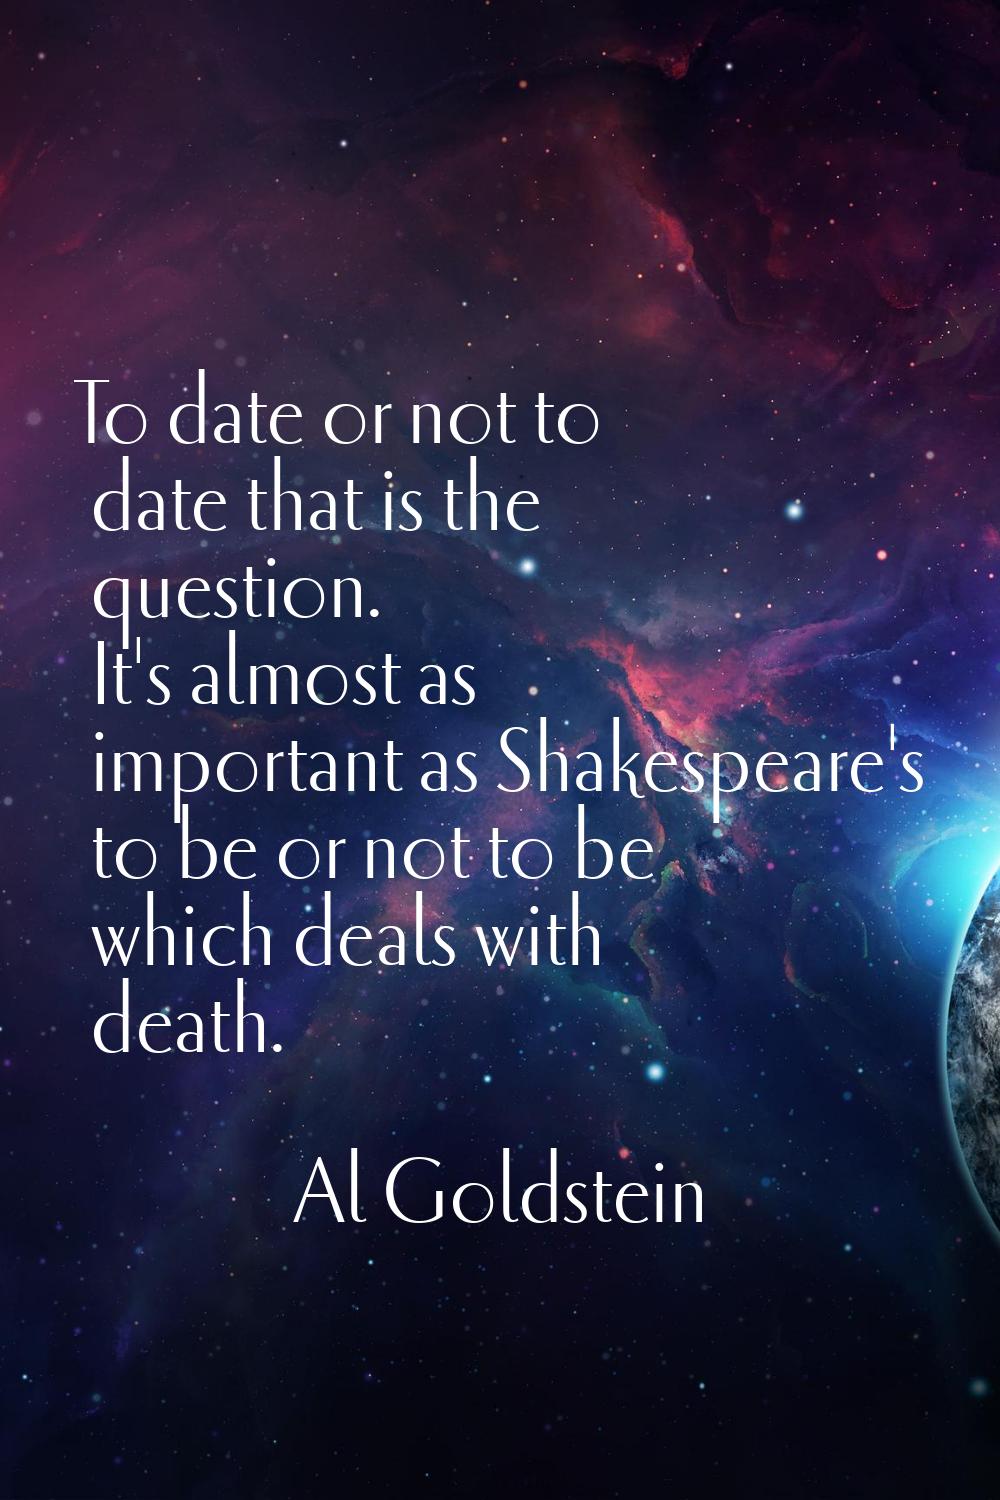 To date or not to date that is the question. It's almost as important as Shakespeare's to be or not